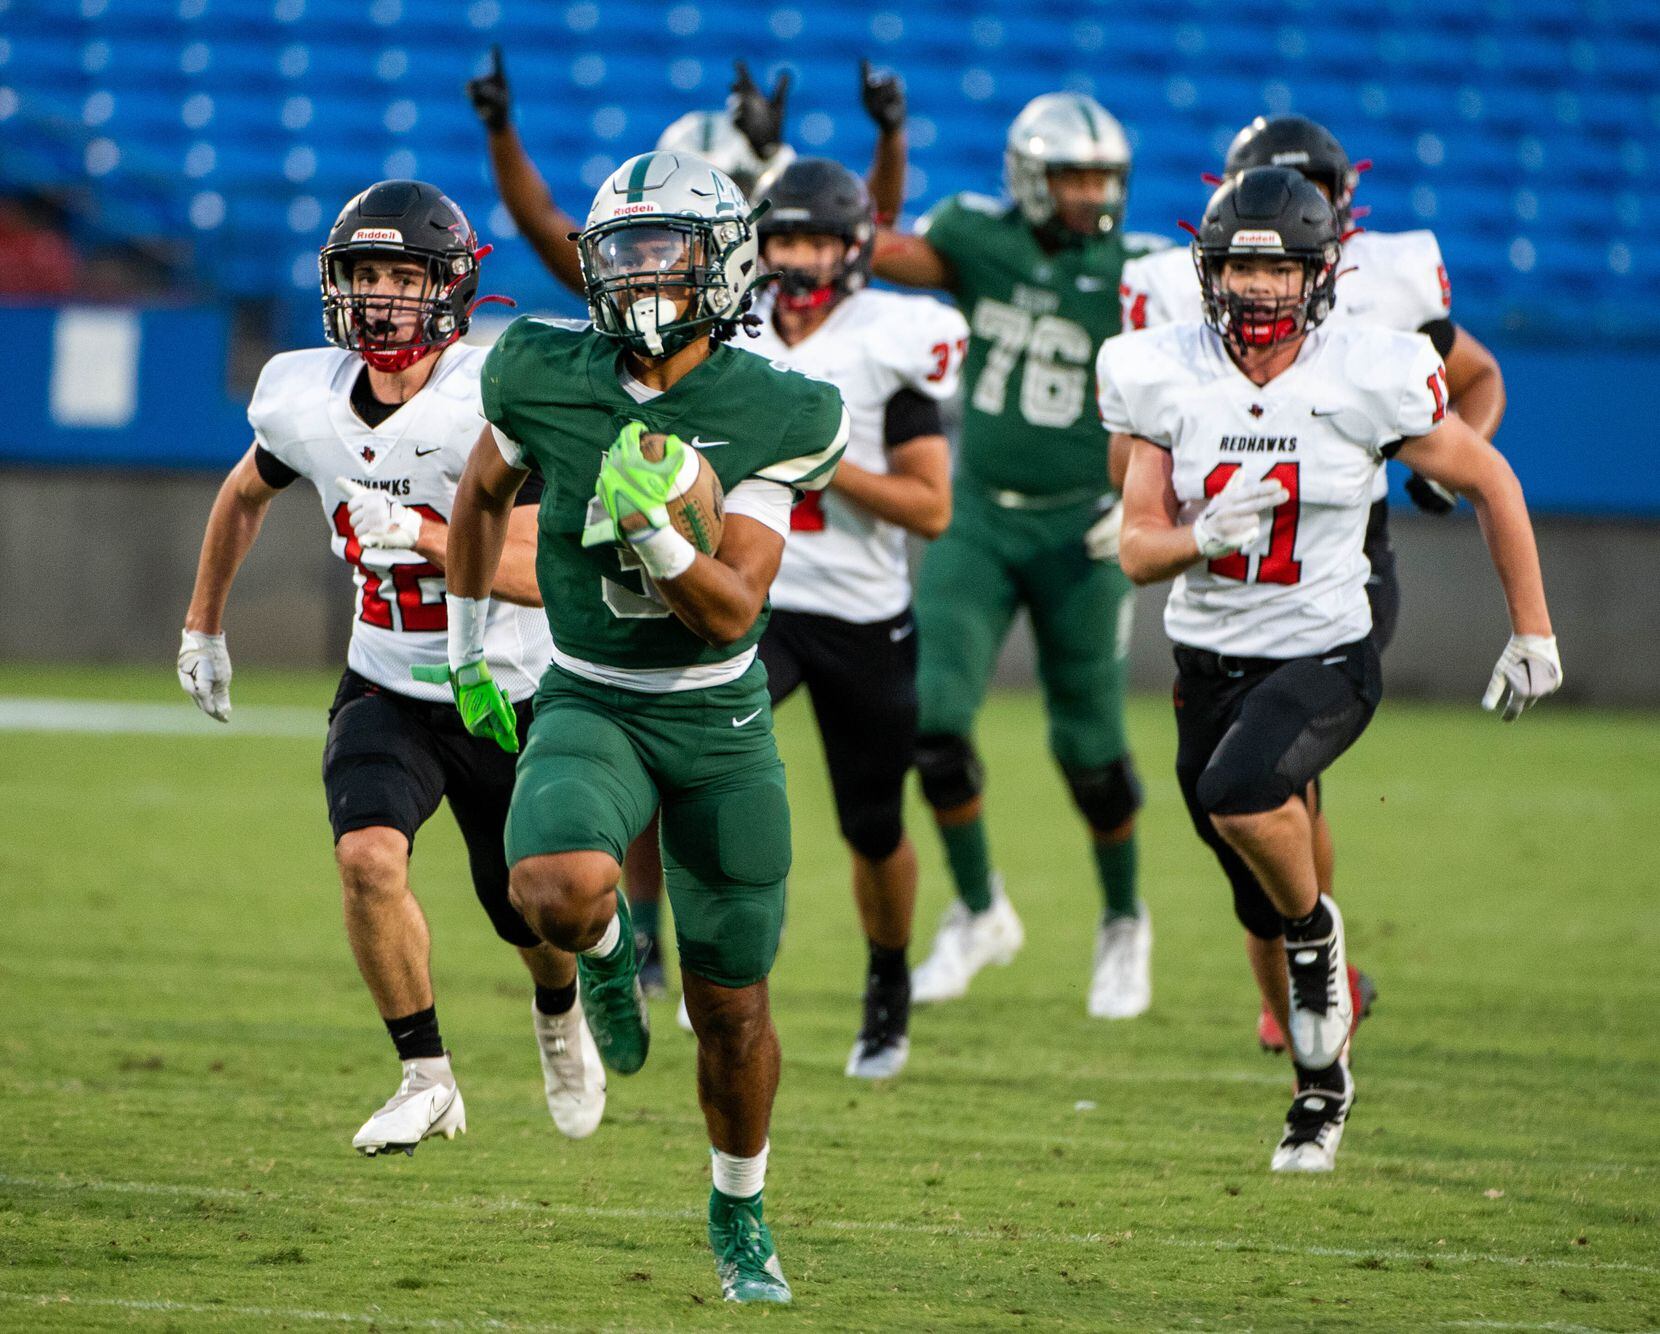 Frisco Reedy's Dennis Moody (3) runs for a touchdown in the first half during a high school...